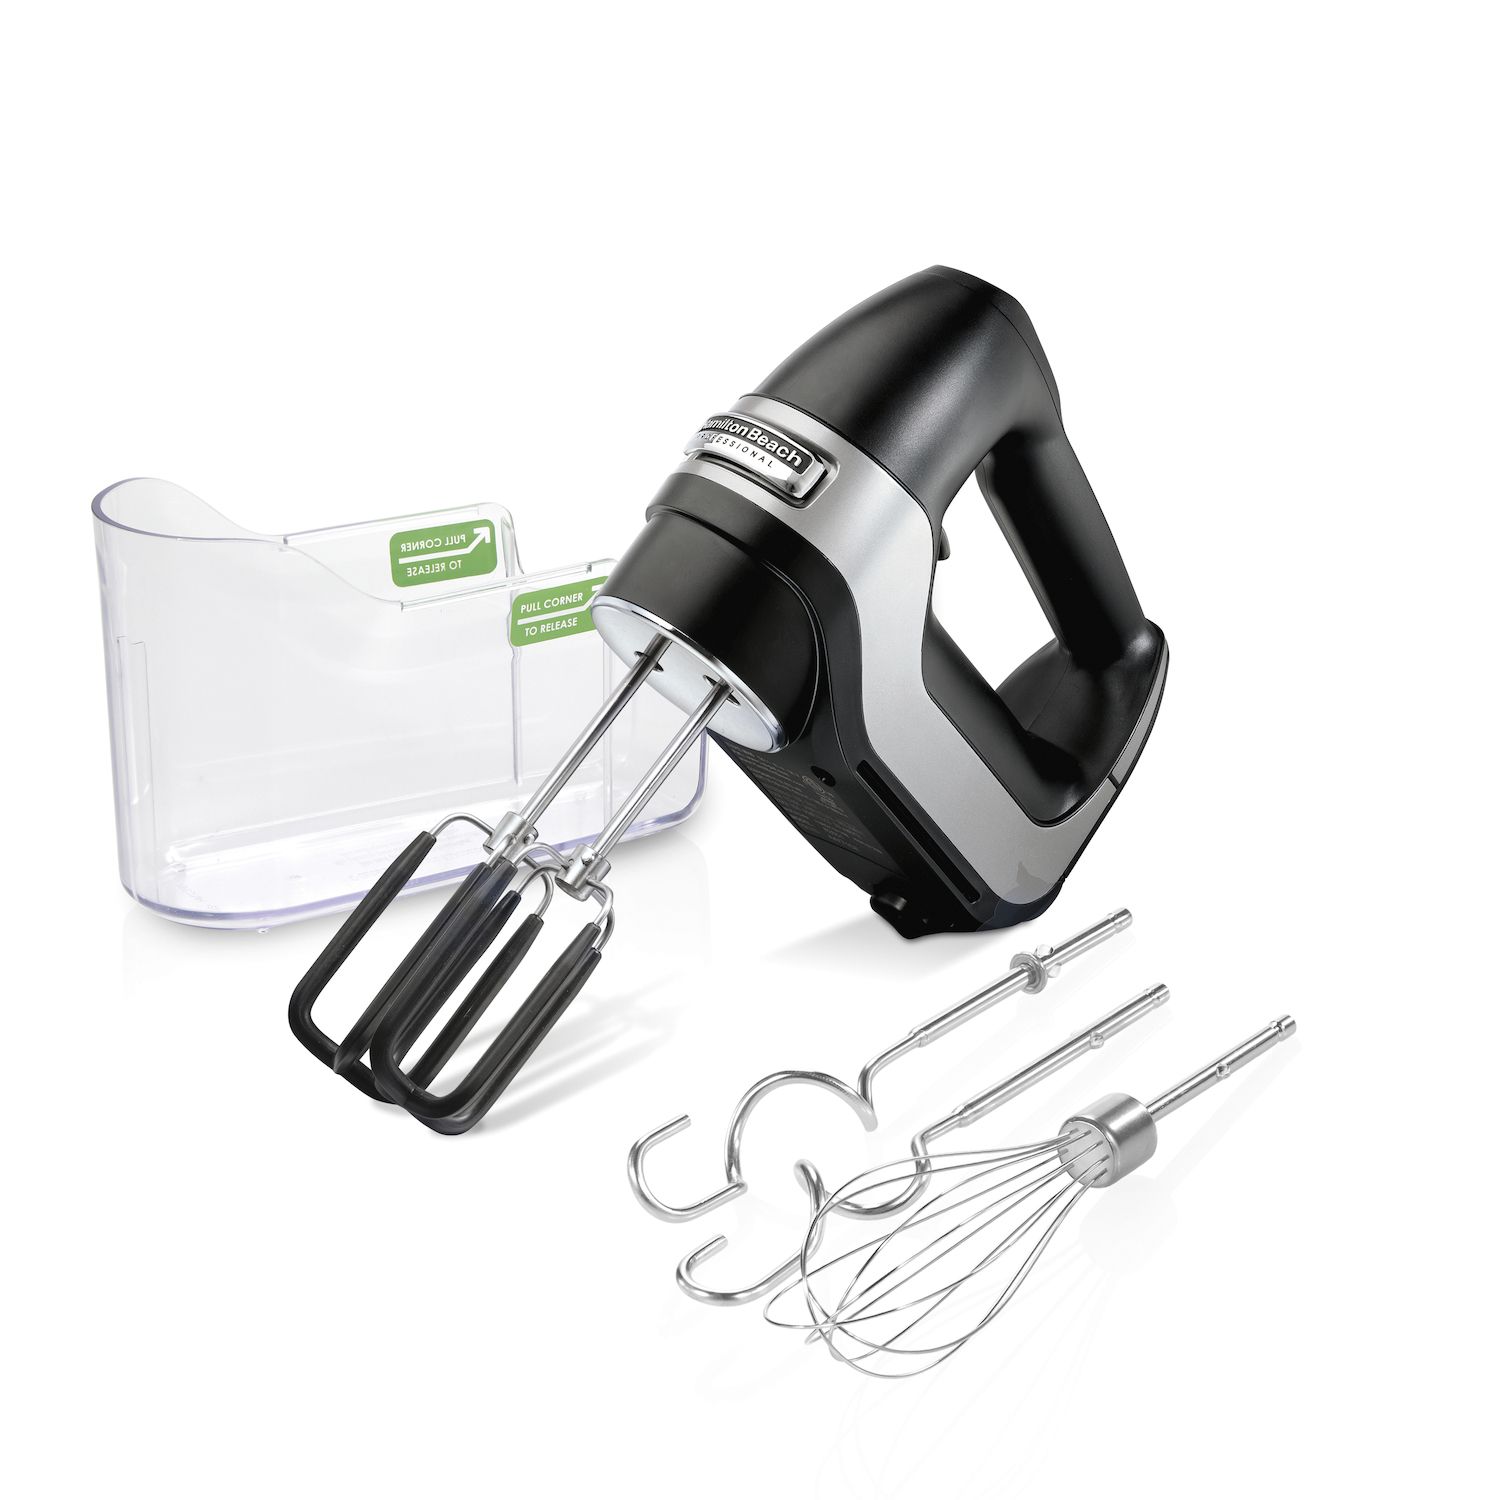 Kenmore 5-Speed Hand Mixer Beater Blender, 250 Watts, with Beaters